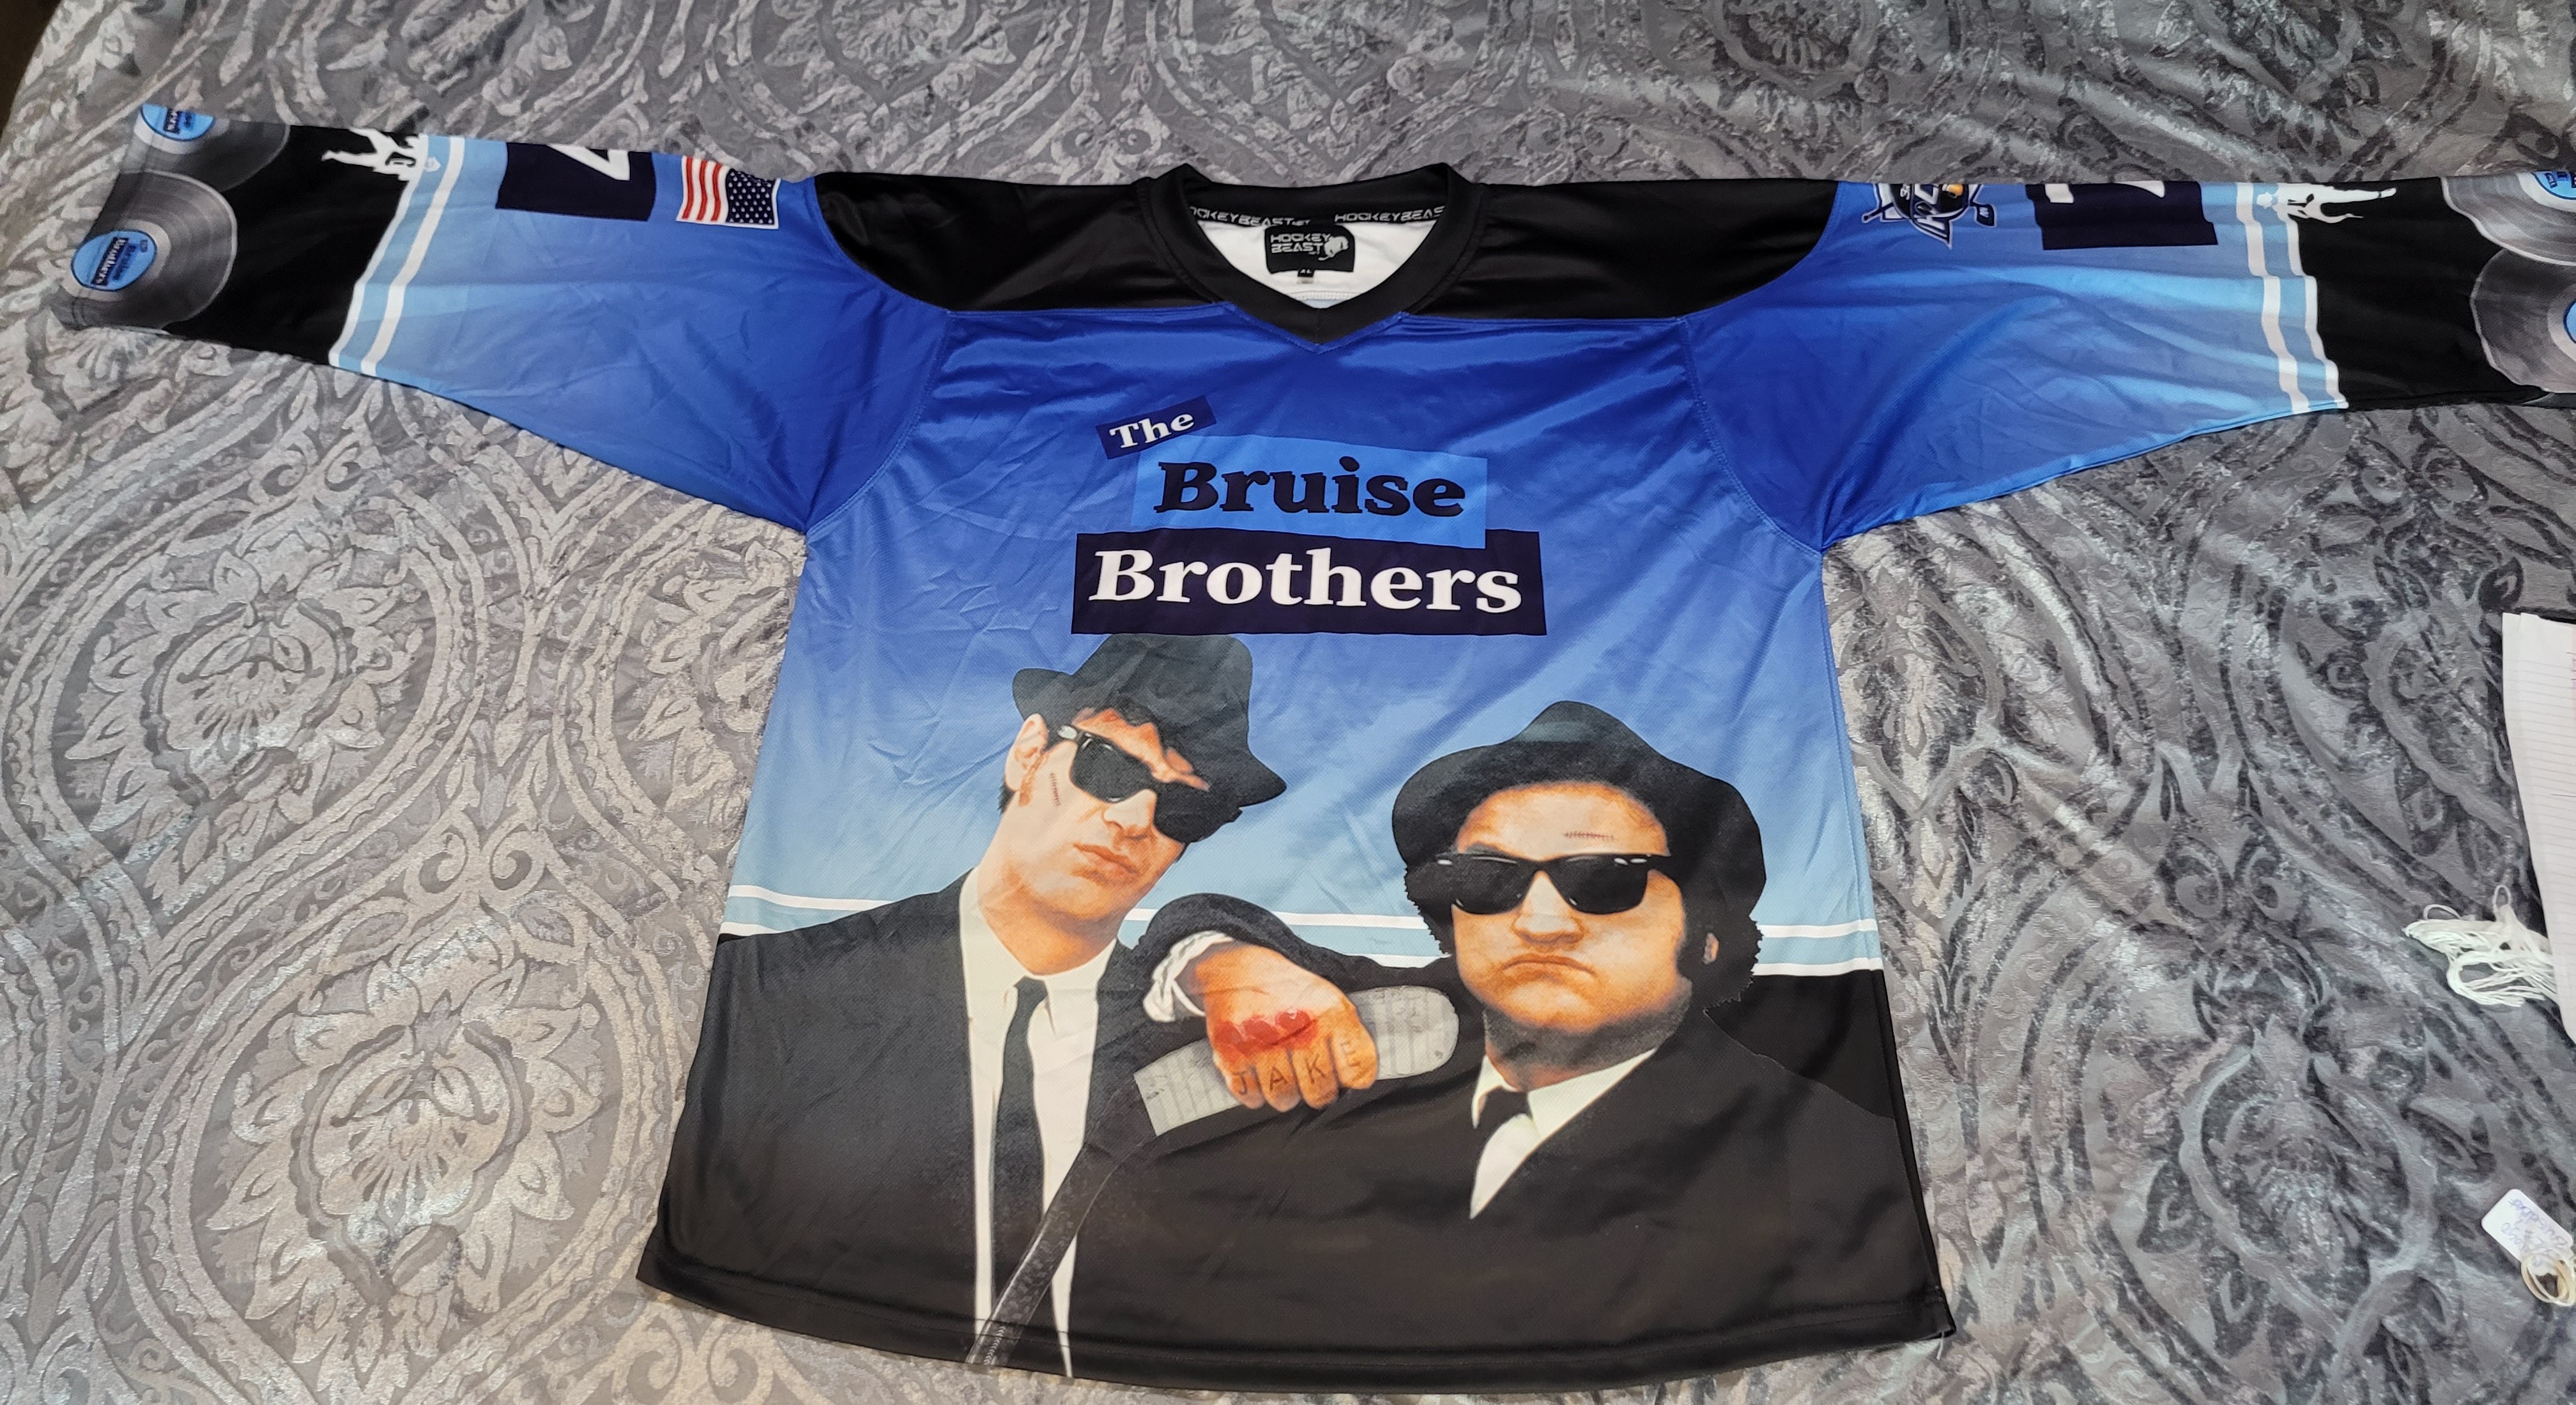 BLUES BROTHERS (BRUISE BROTHERS) TRIBUTE HOCKEY JERSEY XL #7 CUSTOM UNIQUE  3RD LINE HOCKEY